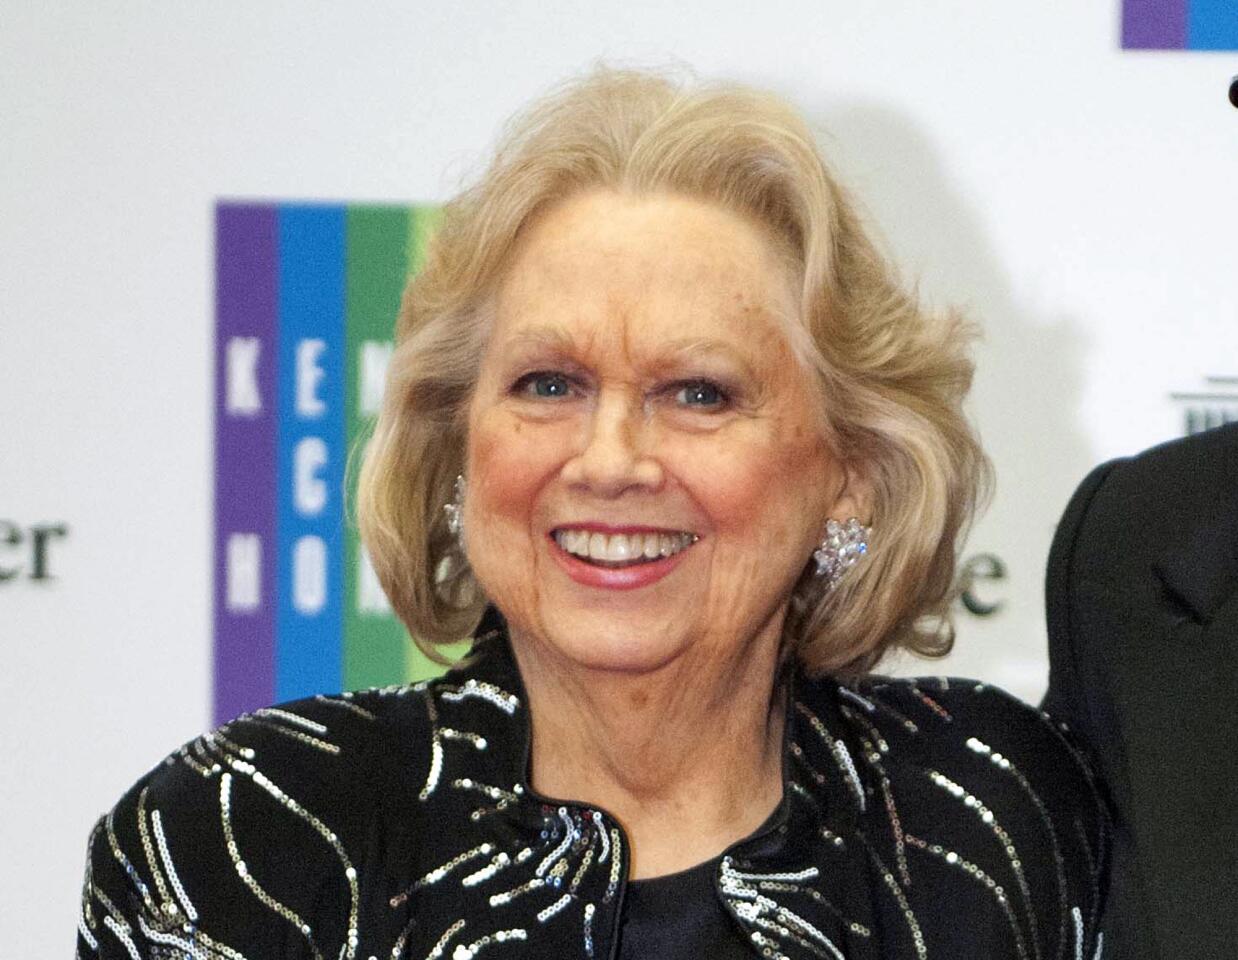 Barbara Cook, whose shimmering soprano made her one of Broadway's leading ingenues and later a major cabaret and concert interpreter of popular American song, died Aug. 8, 2017. She was 89. Read more.